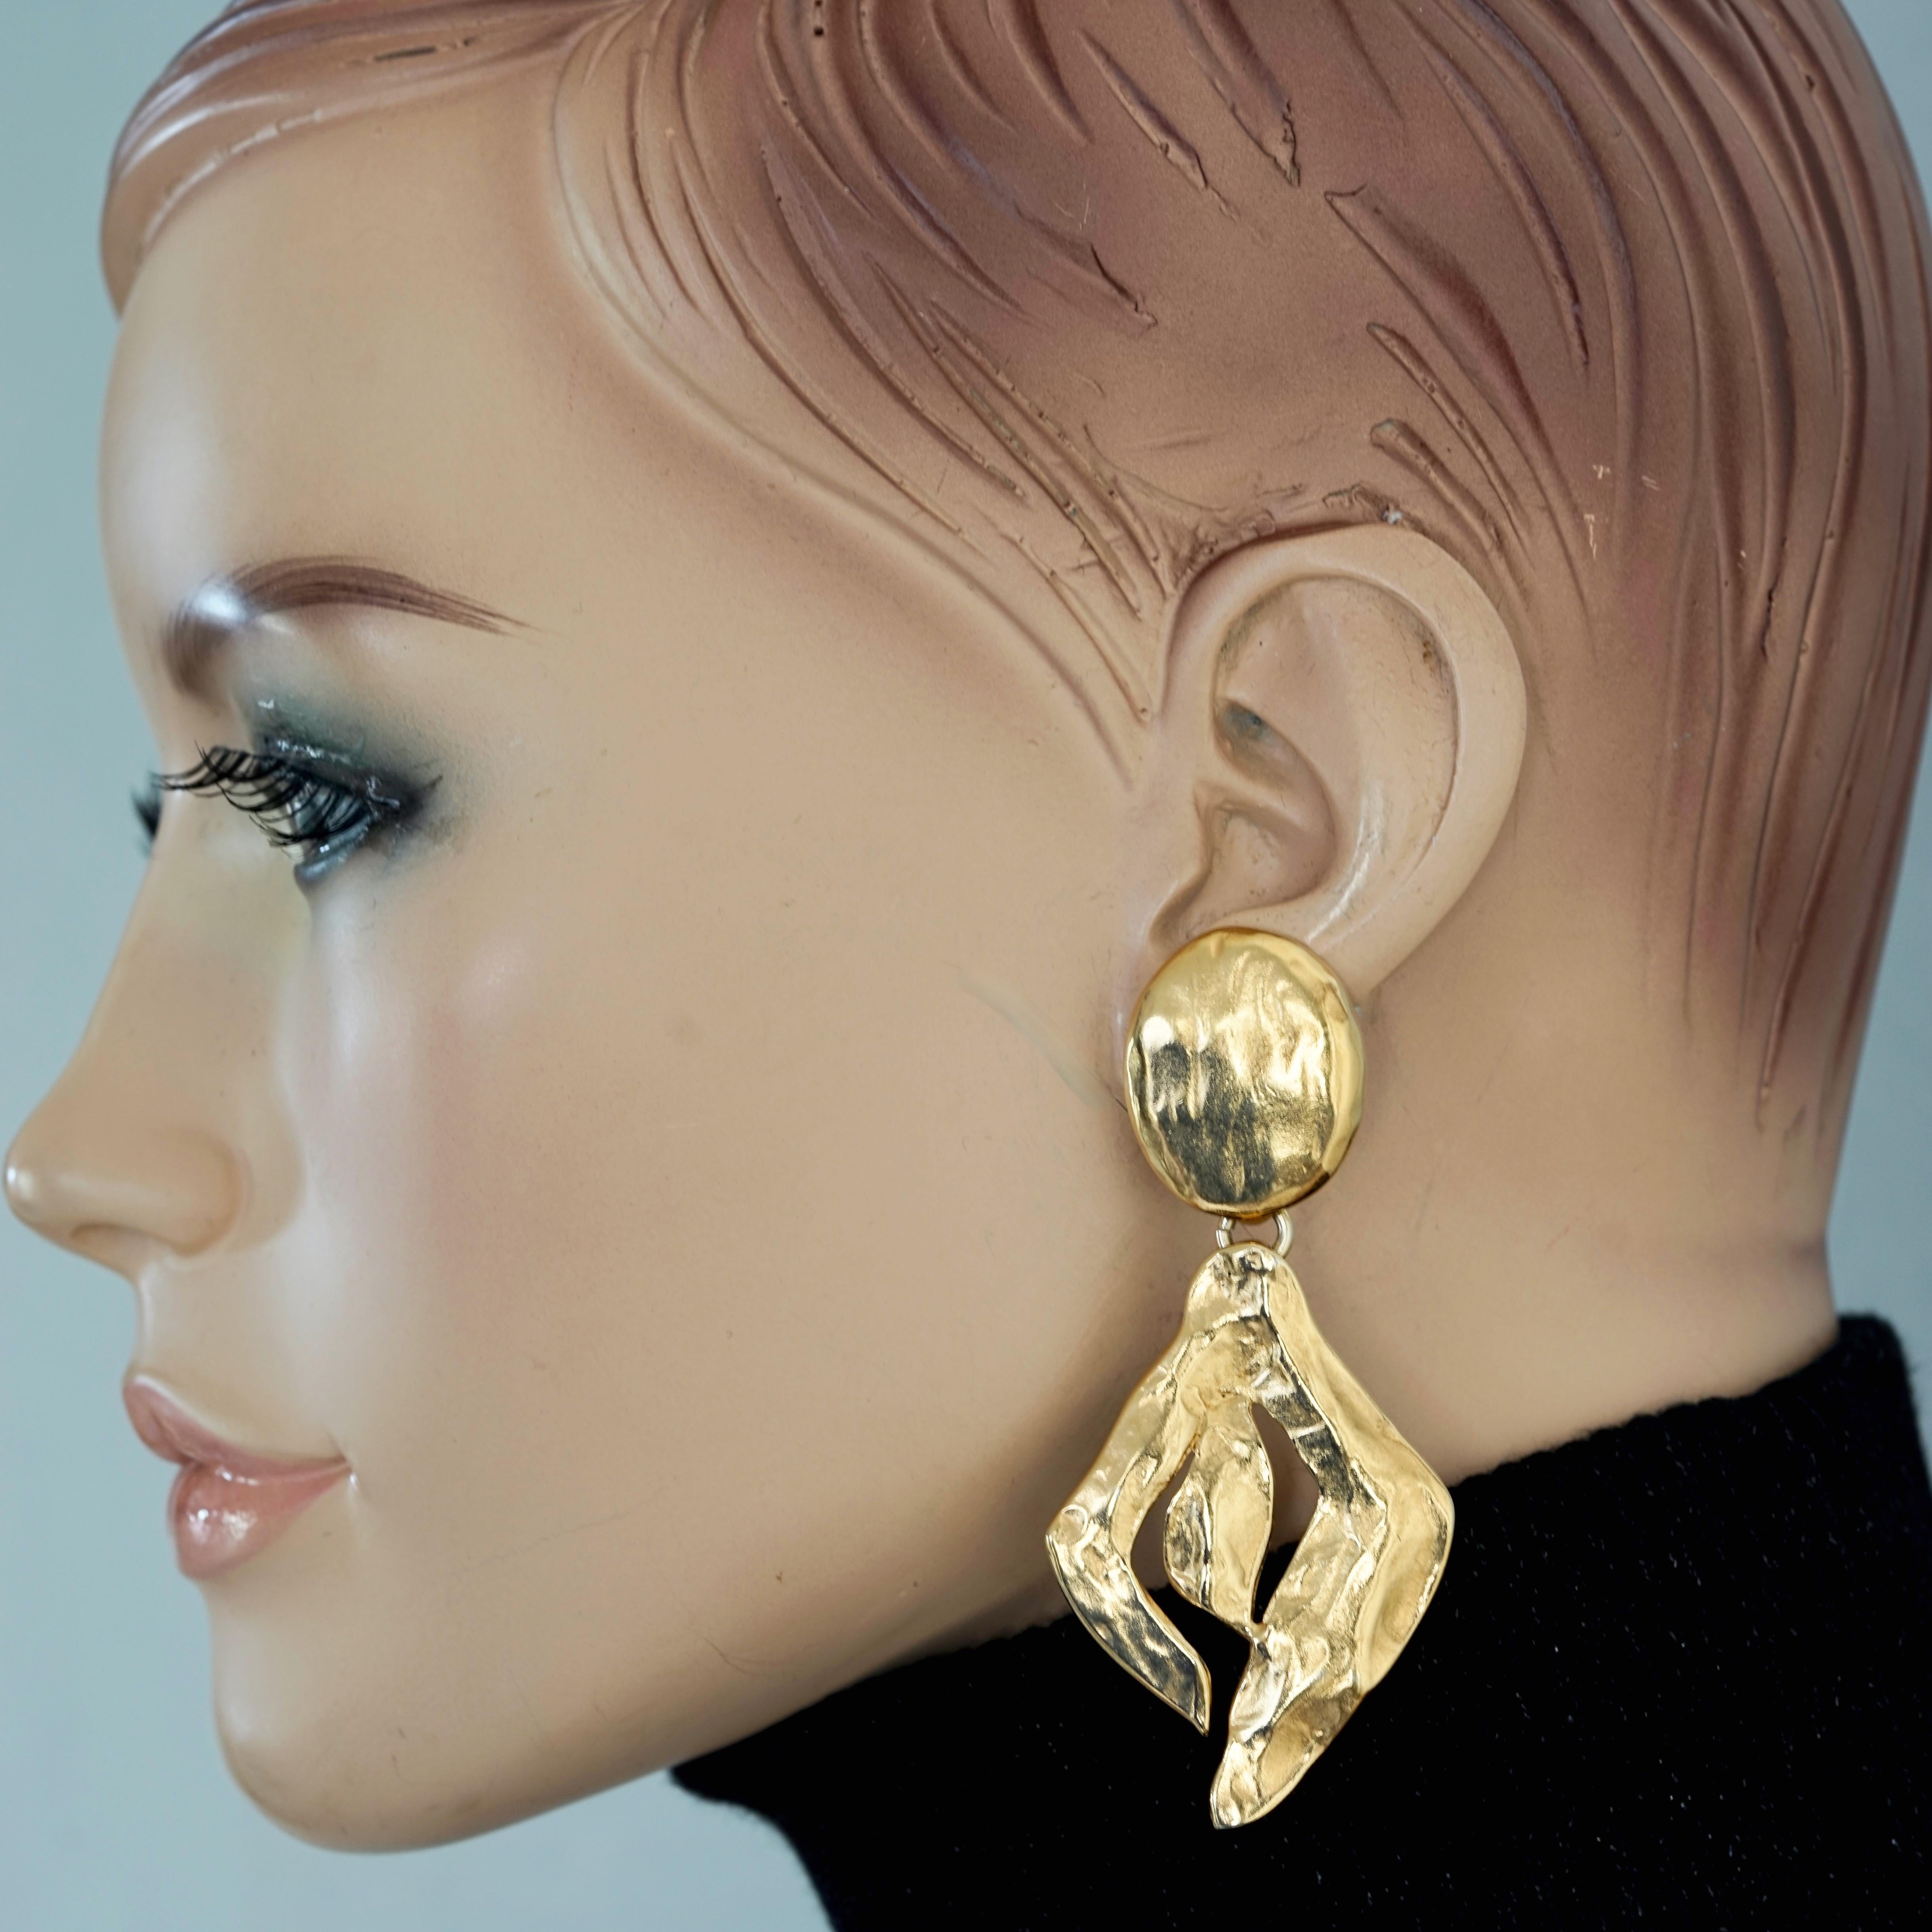 Vintage YSL Yves Saint Laurent Hammered Stylized Drop Earrings

Measurements:
Height: 3 1/8 inches (7.93 cms)
Width: 1 4/8 inches (3.81 cms)

Features:
- 100% Authentic YVES SAINT LAURENT.
- Hammered stylized drop earrings.
- Gold tone.
- Signed YSL